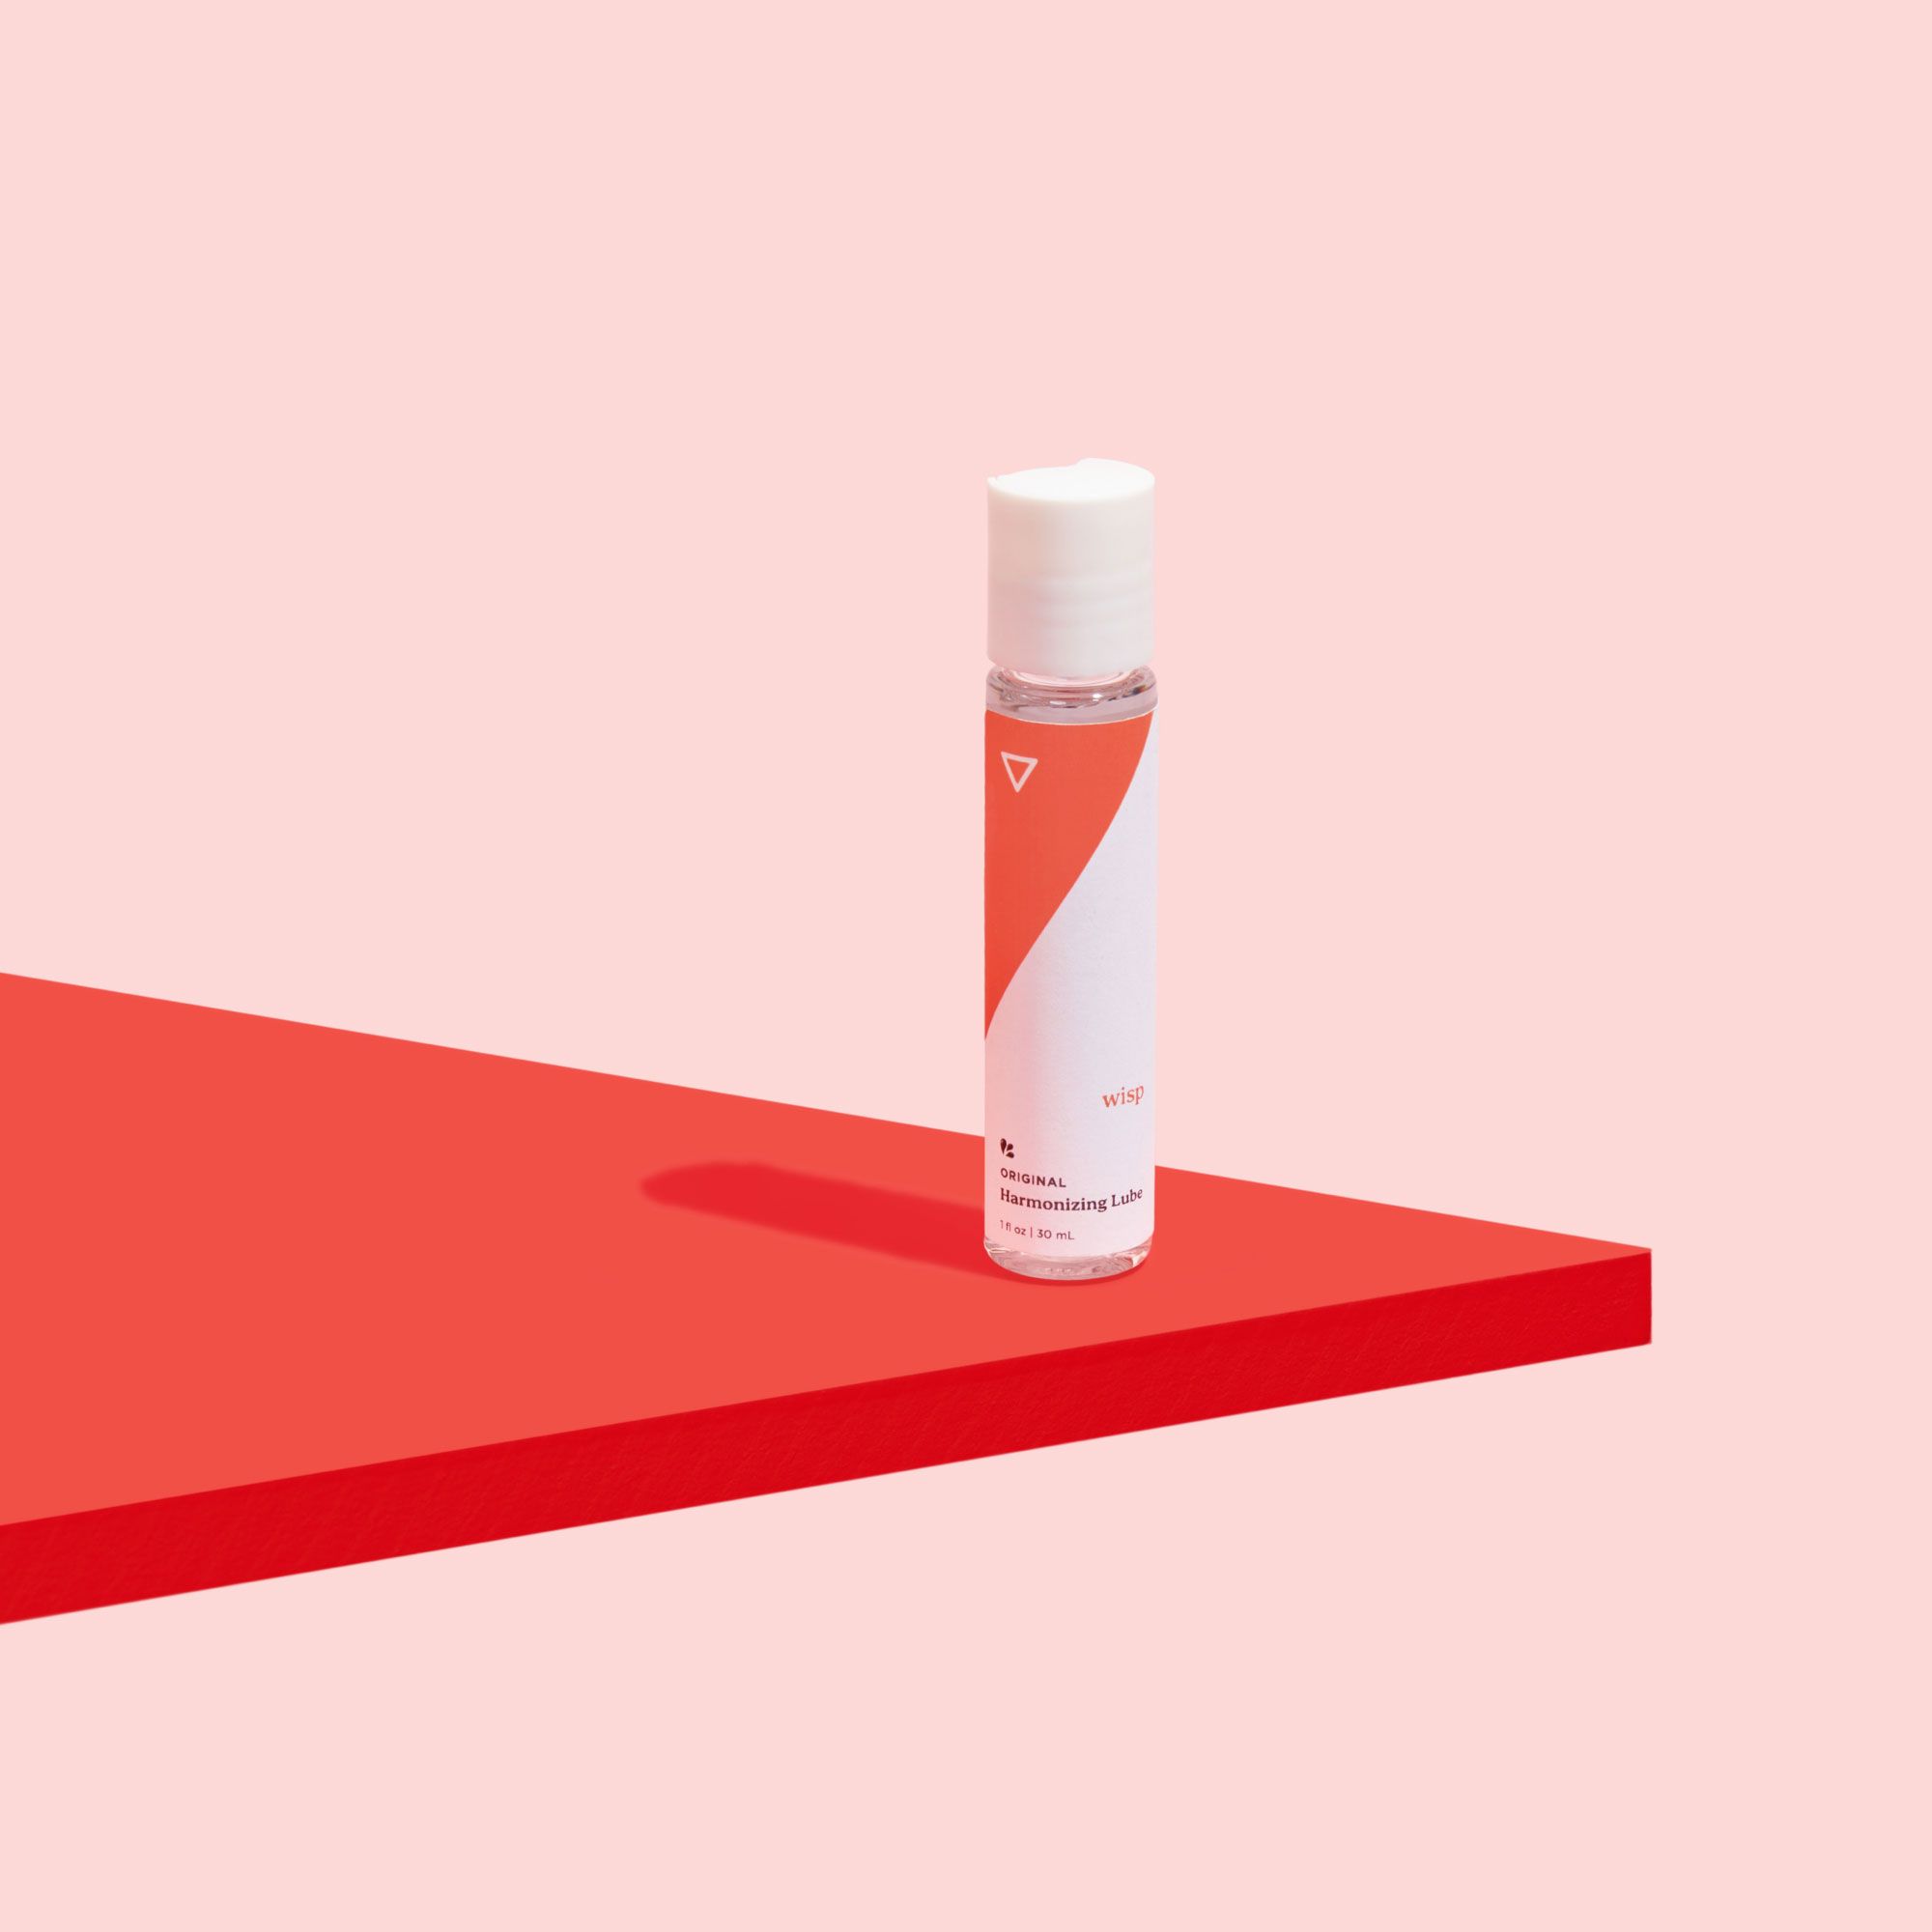 Wisp Harmonizing Lube on a red surface on a pink background